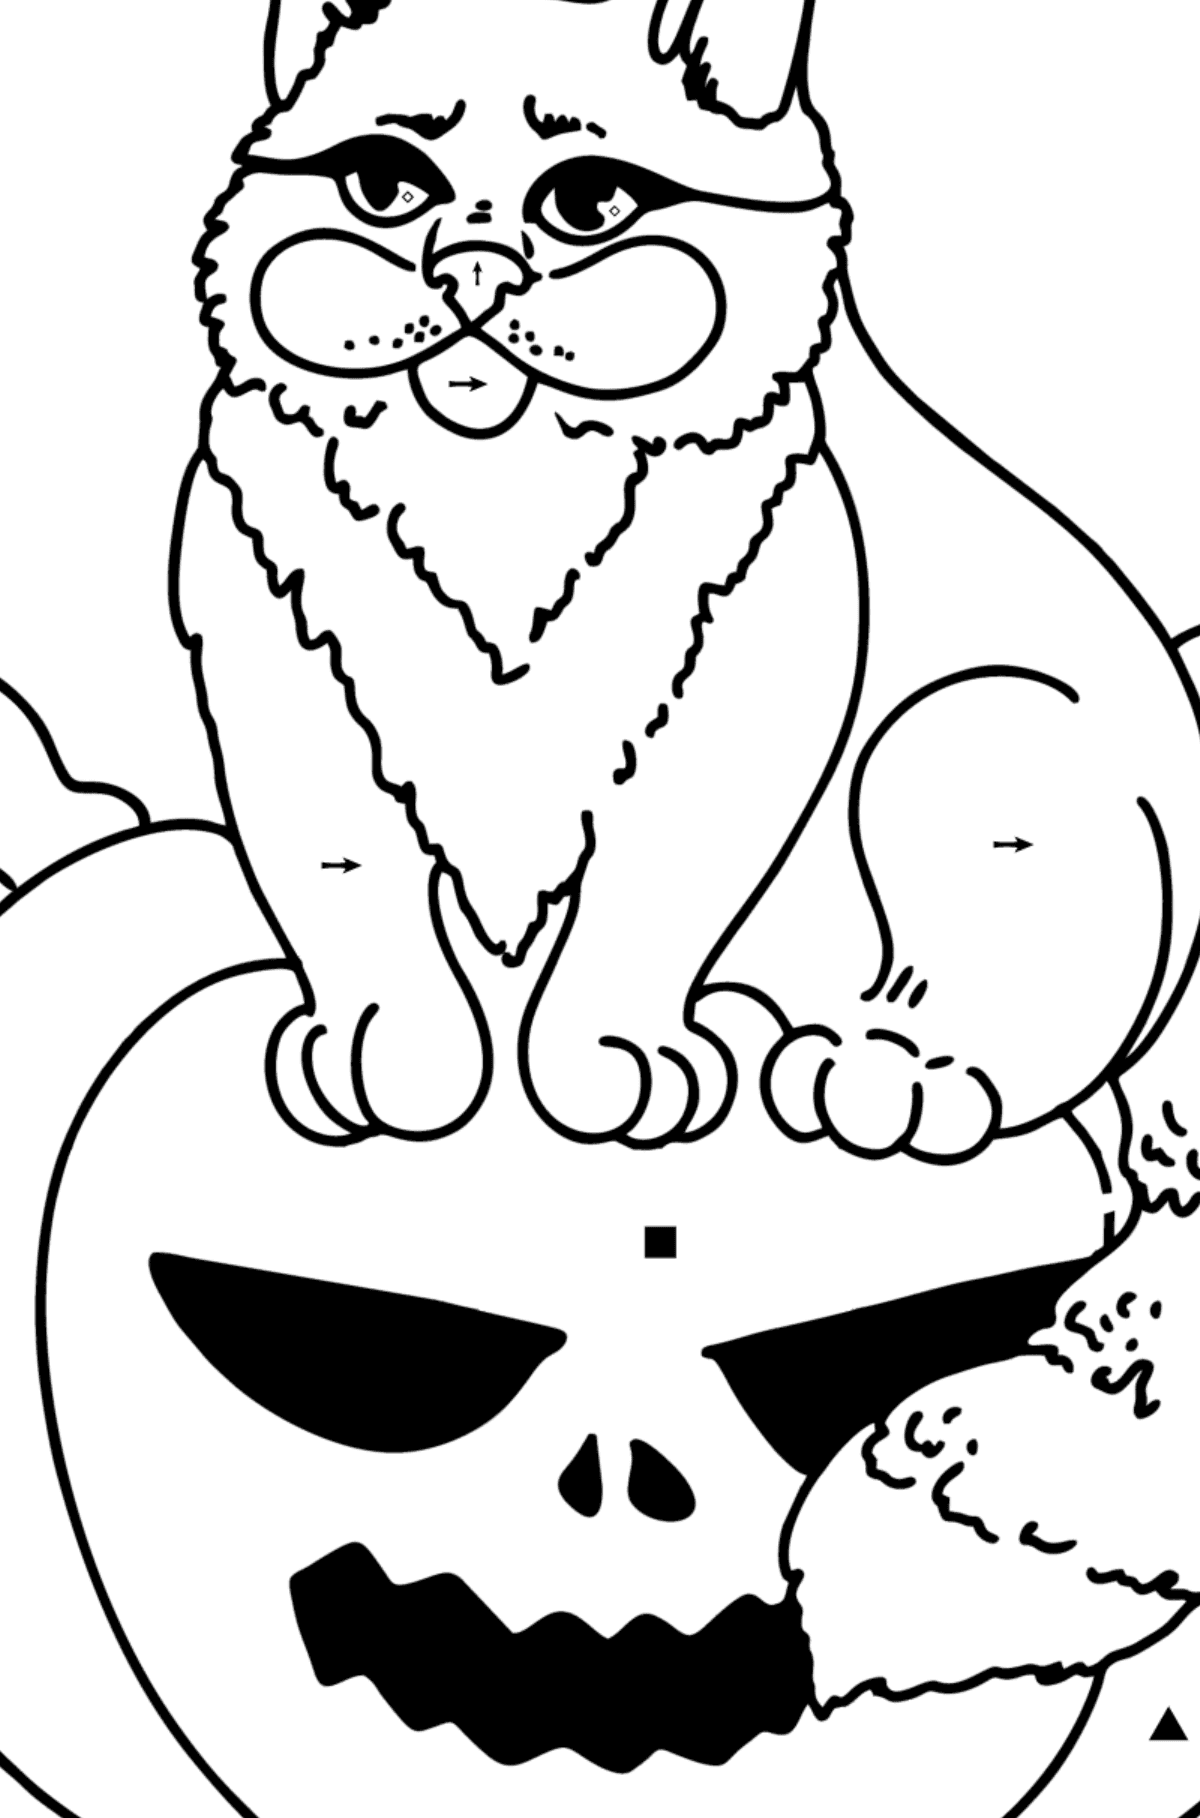 Halloween Cat coloring page - Coloring by Symbols for Kids